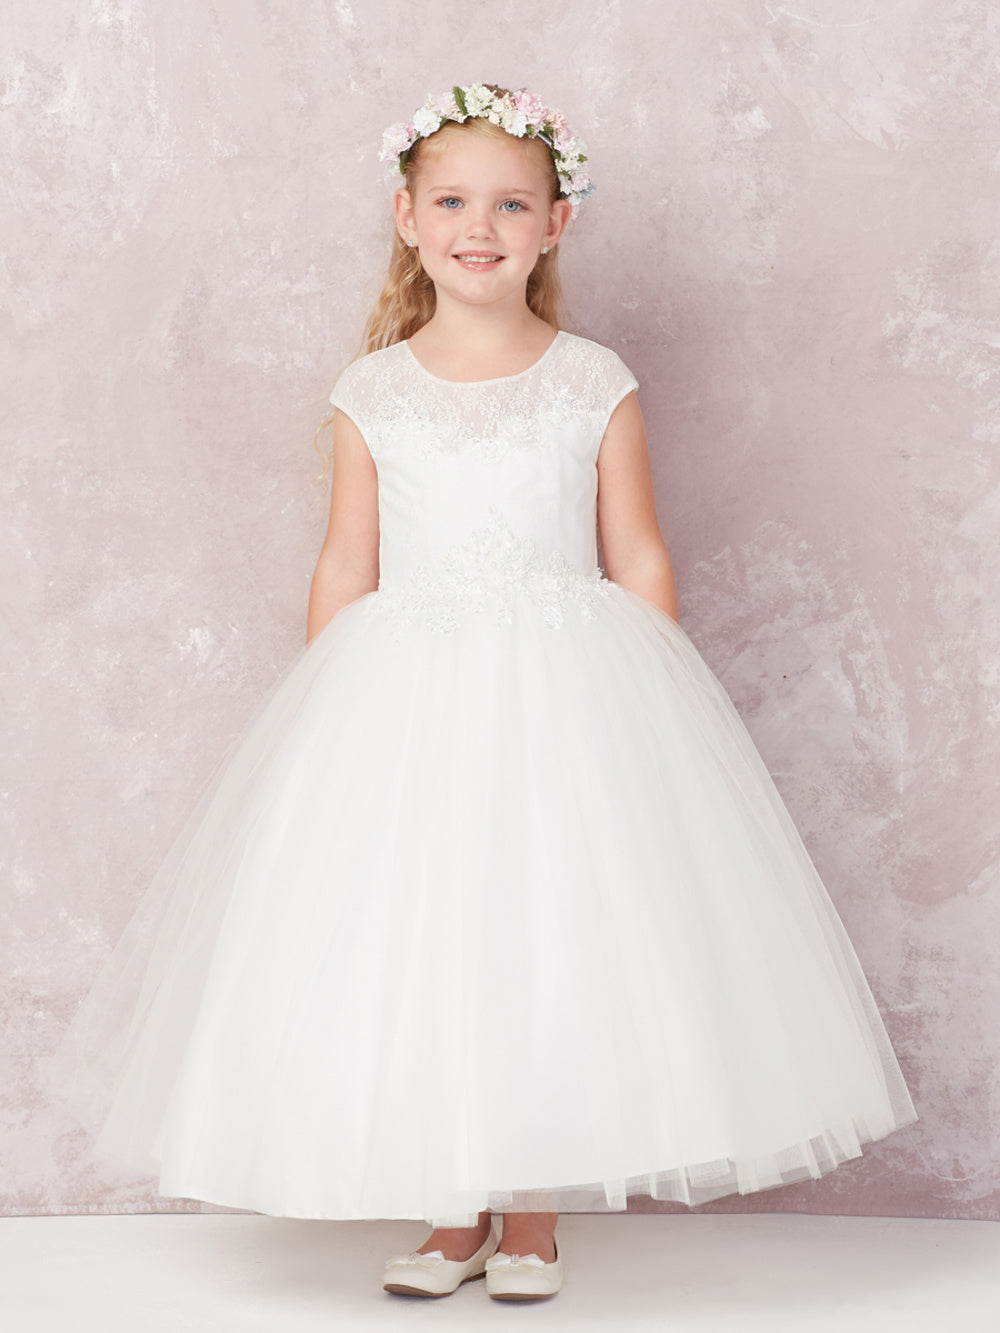 Flower Girl Dress with Cap Sleeved Illusion Neckline Dress by TIPTOP KIDS - AS5755